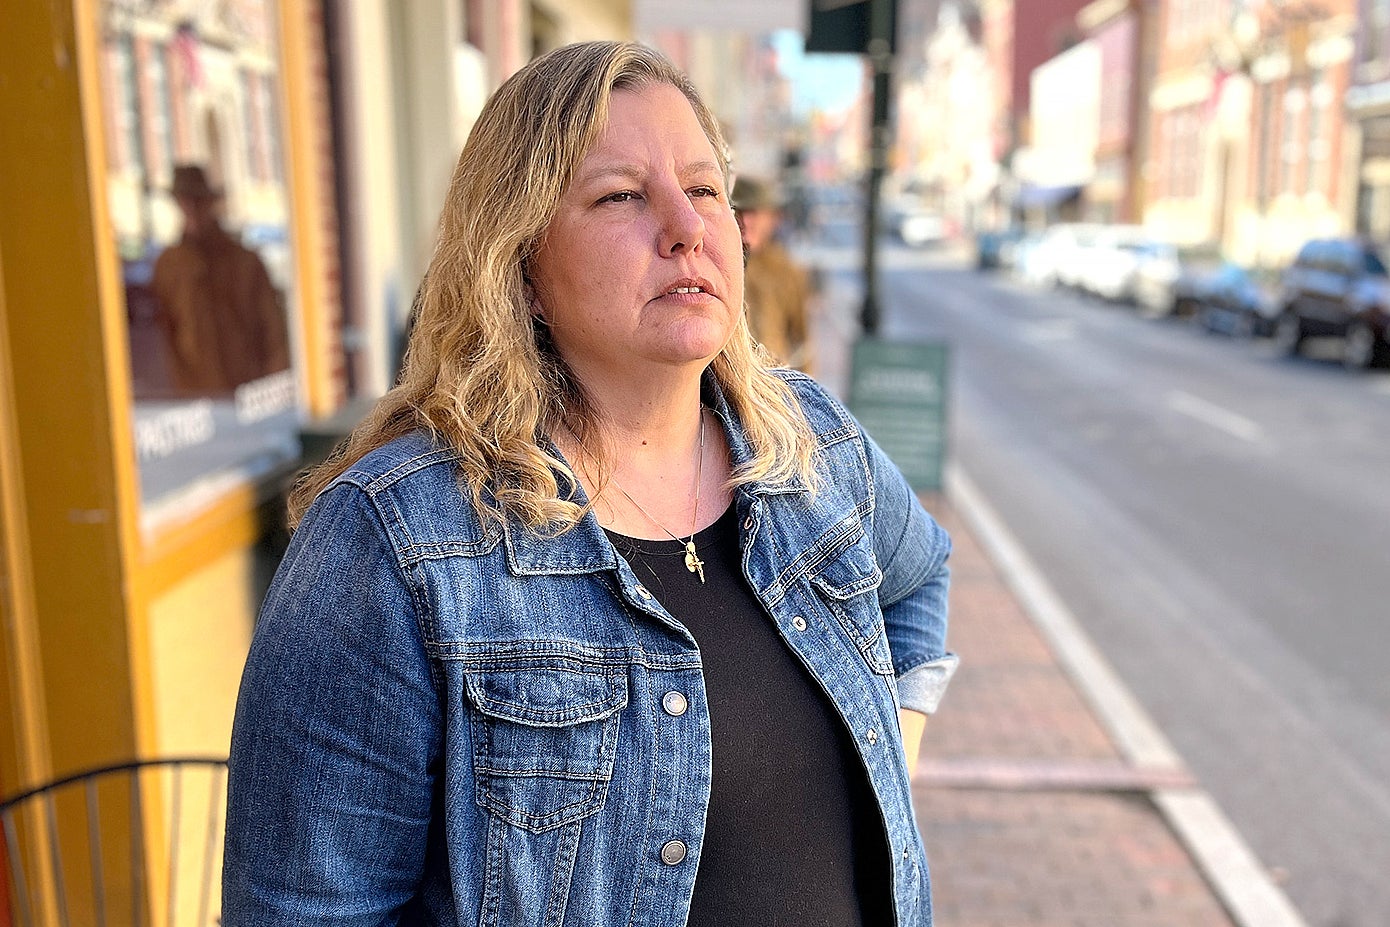 A woman with blond hair, wearing a jean jacket, stands on a sidewalk on a small town downtown street.